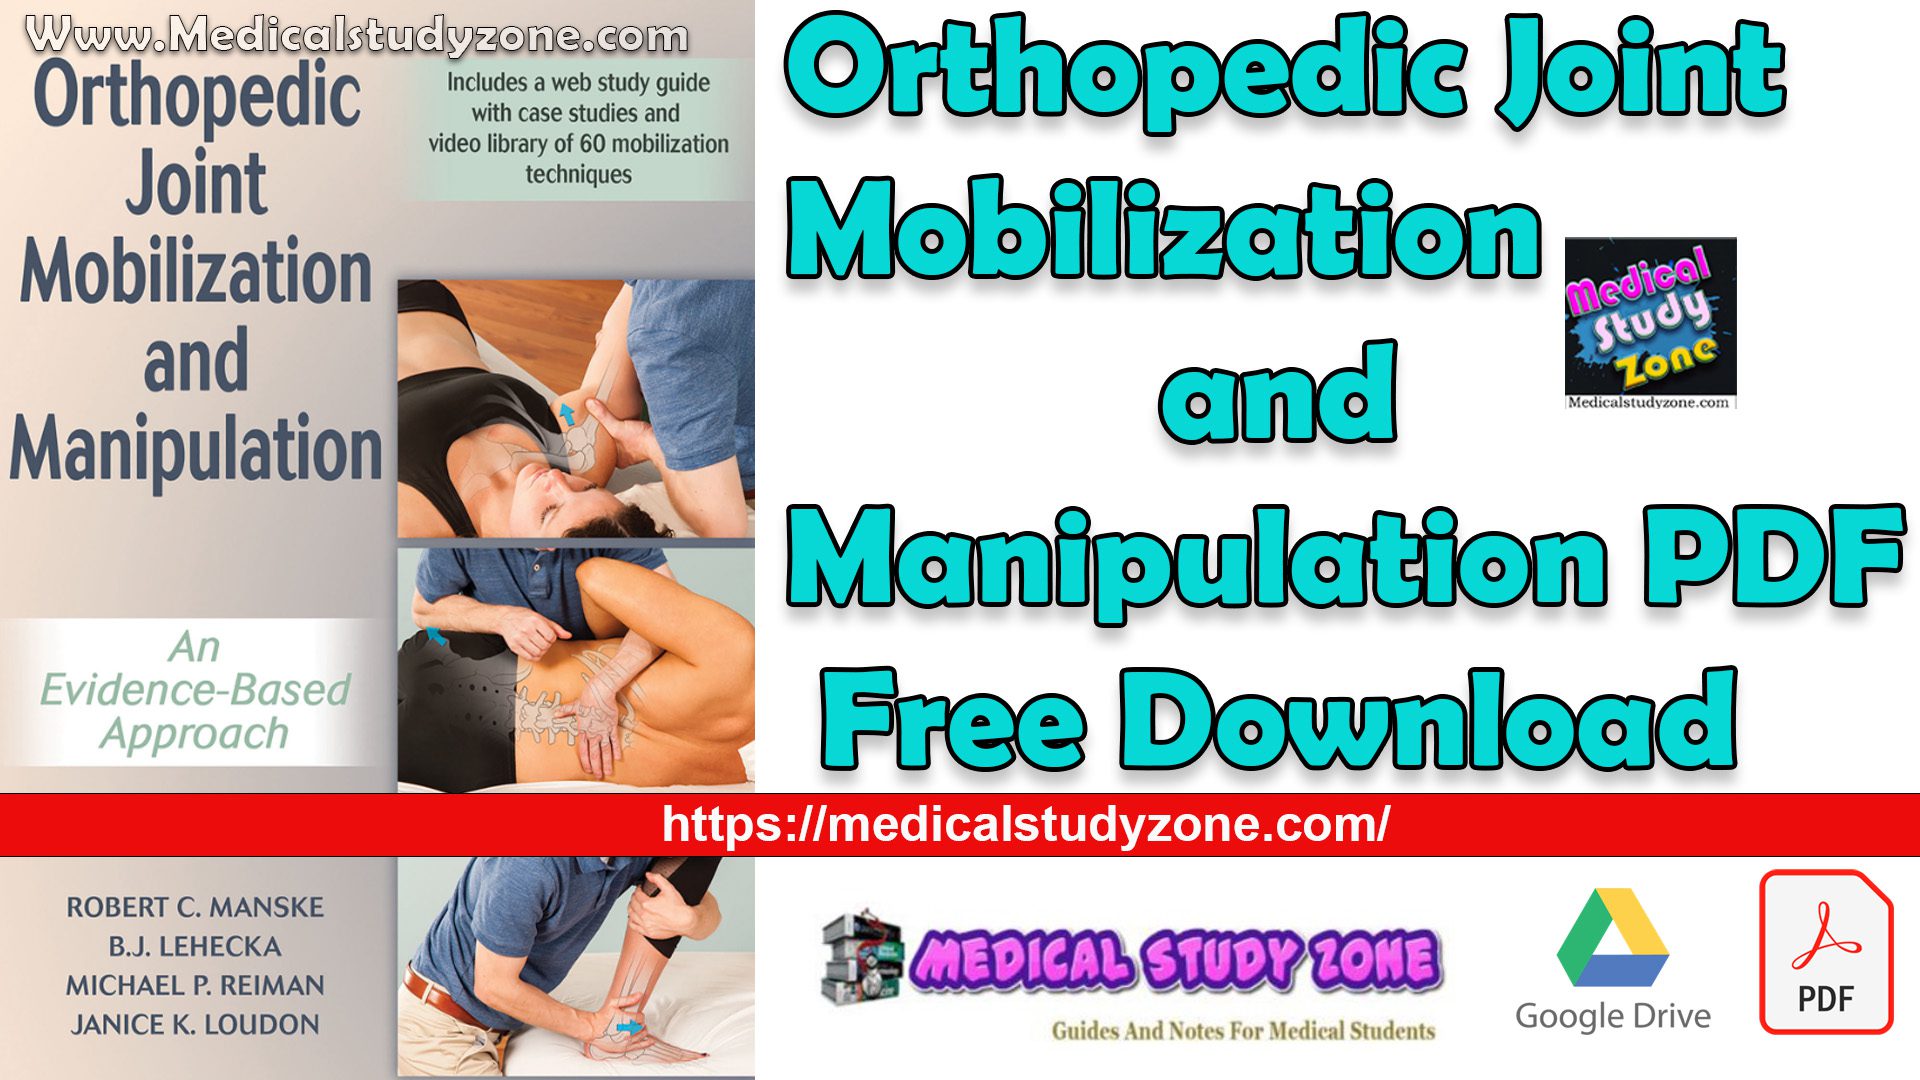 Orthopedic Joint Mobilization and Manipulation PDF Free Download